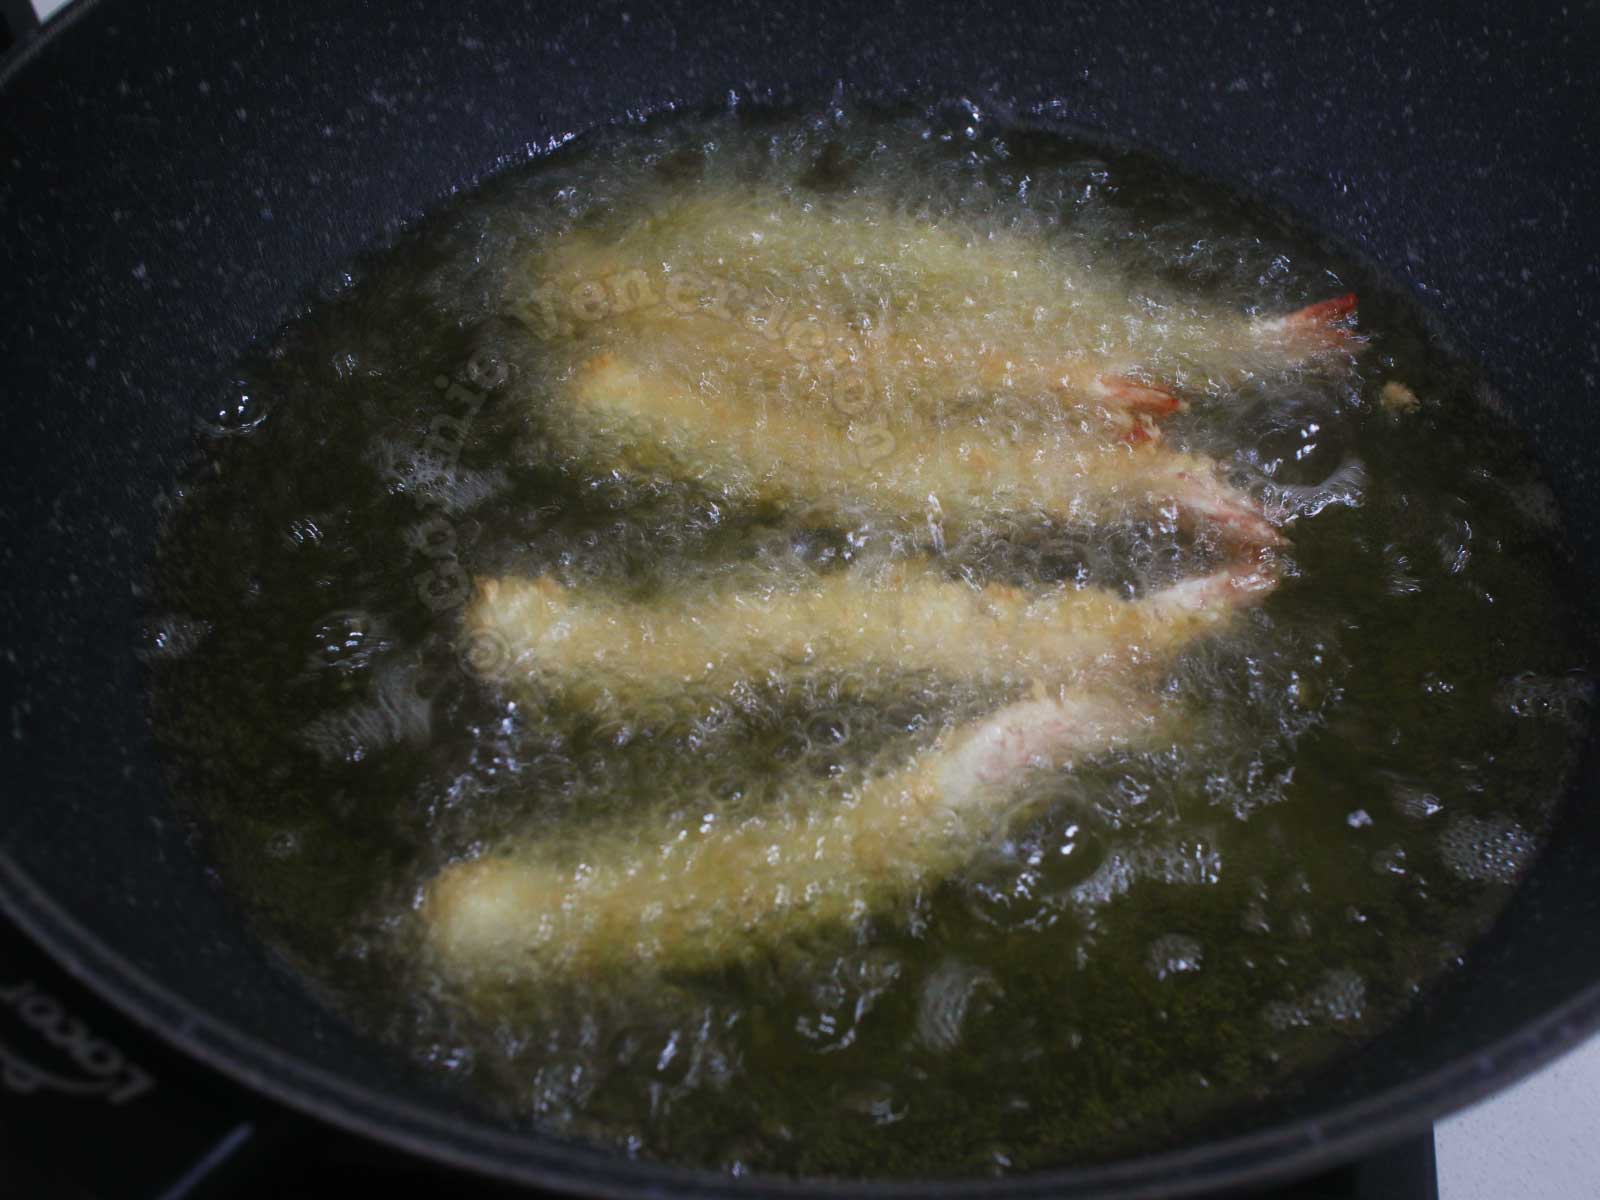 Pan frying, shallow frying, deep frying: what's the difference?